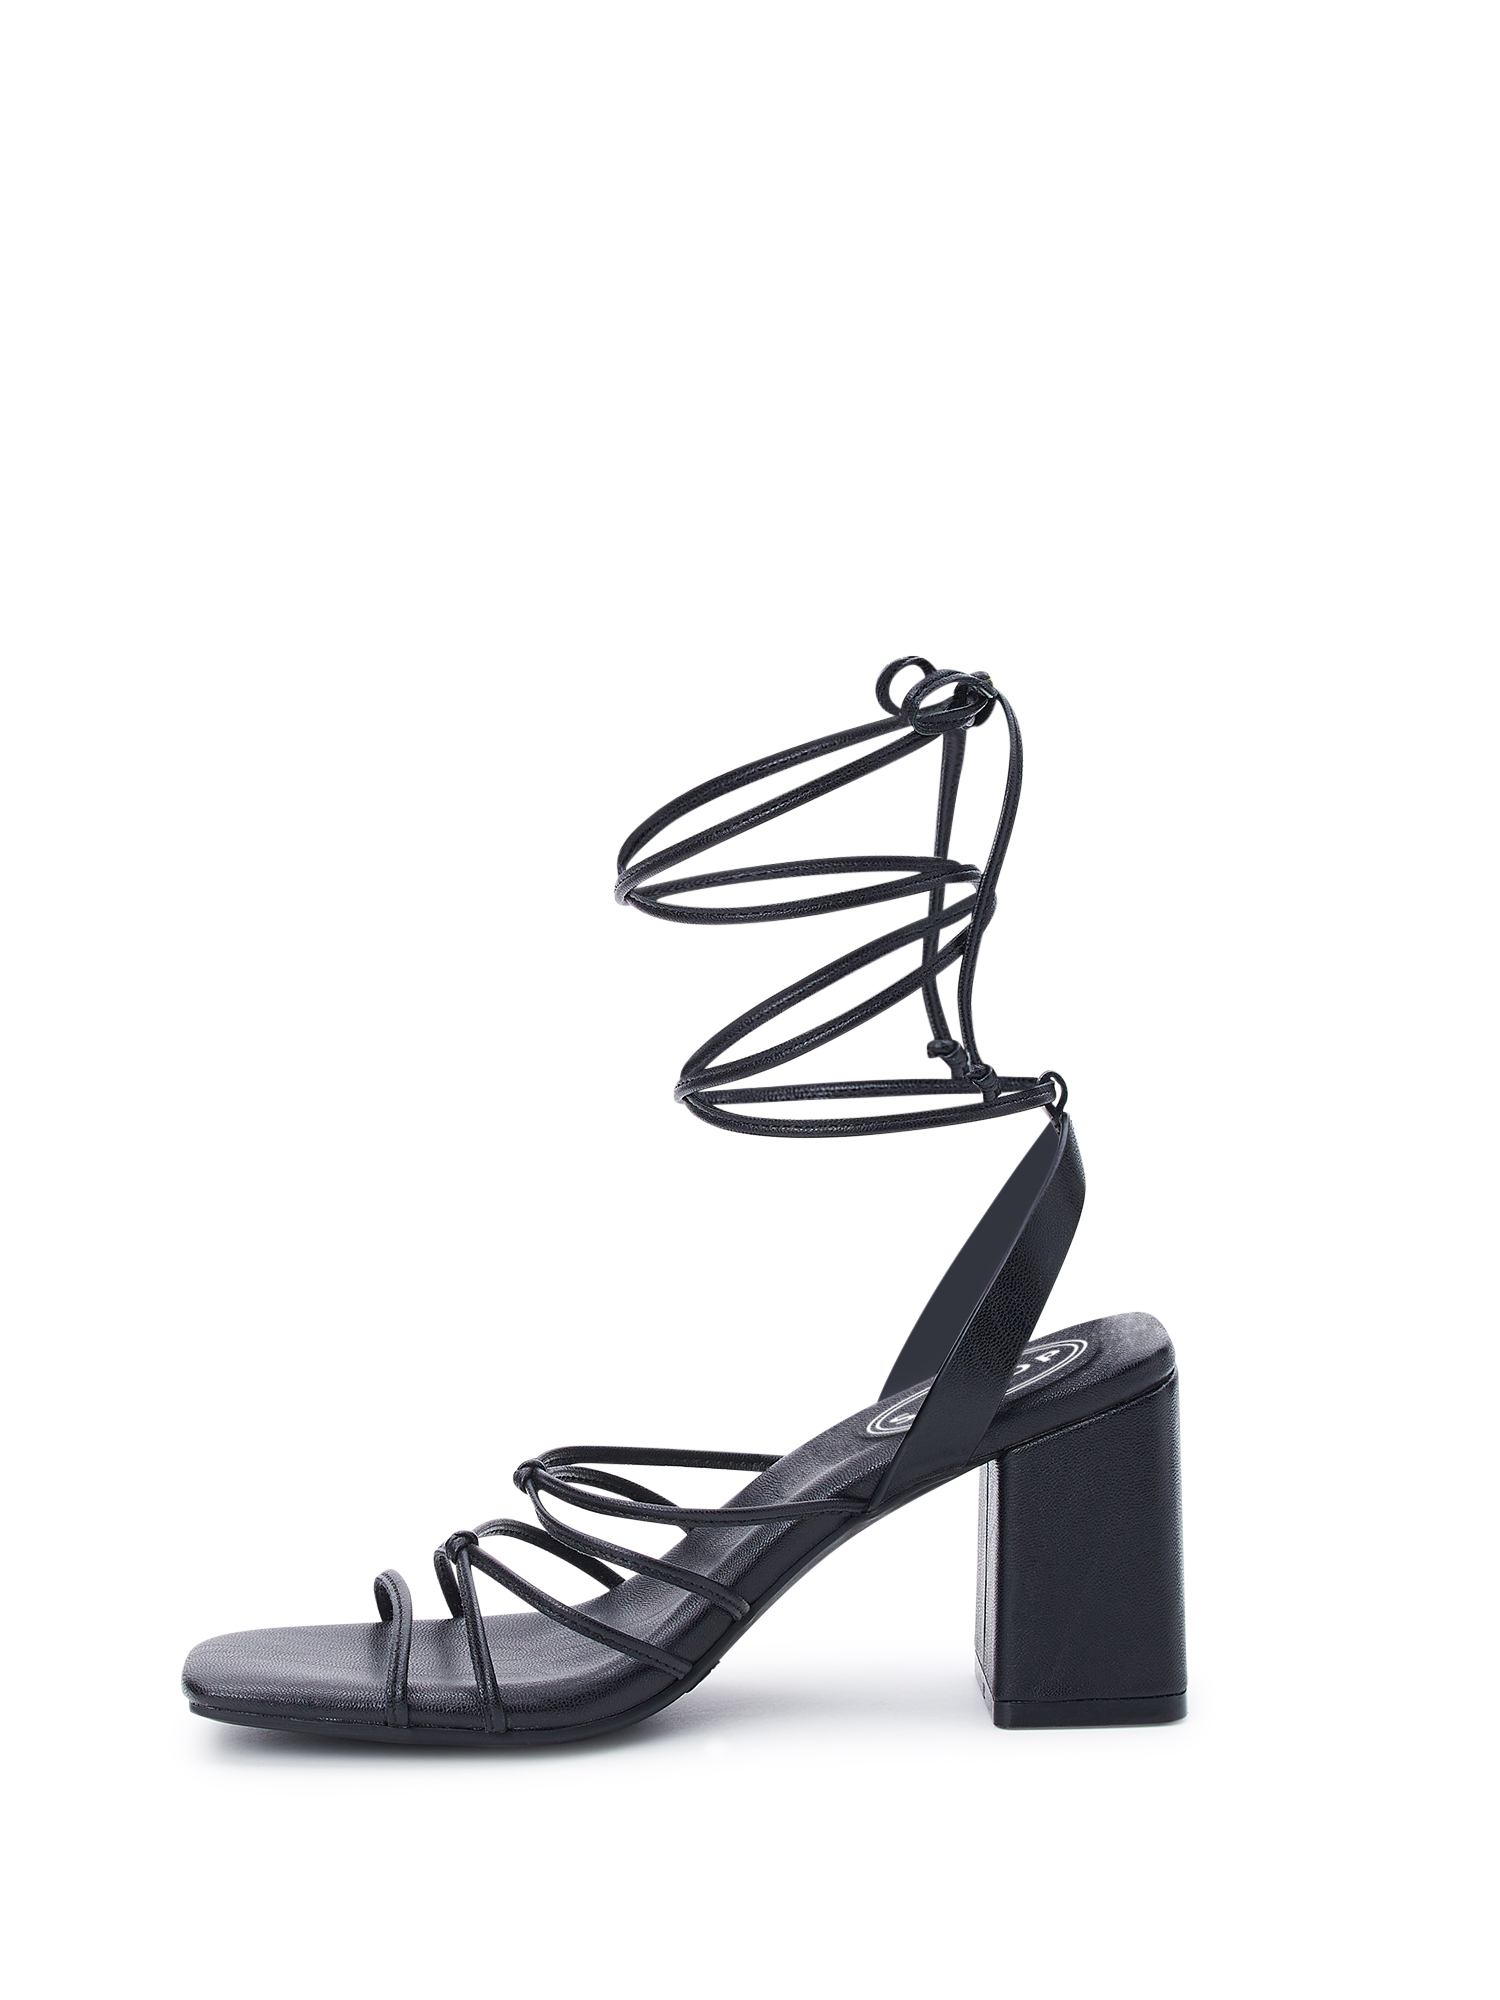 Amazon.com: Women's Sexy Strappy High Heels Sandals Open Square Toe Lace Up  High Chunky Heel Dress Sandals Ring Toe Fashion Classic Leather Fashion Block  Heel Dress Sandals for Hot Girls Wedding Party